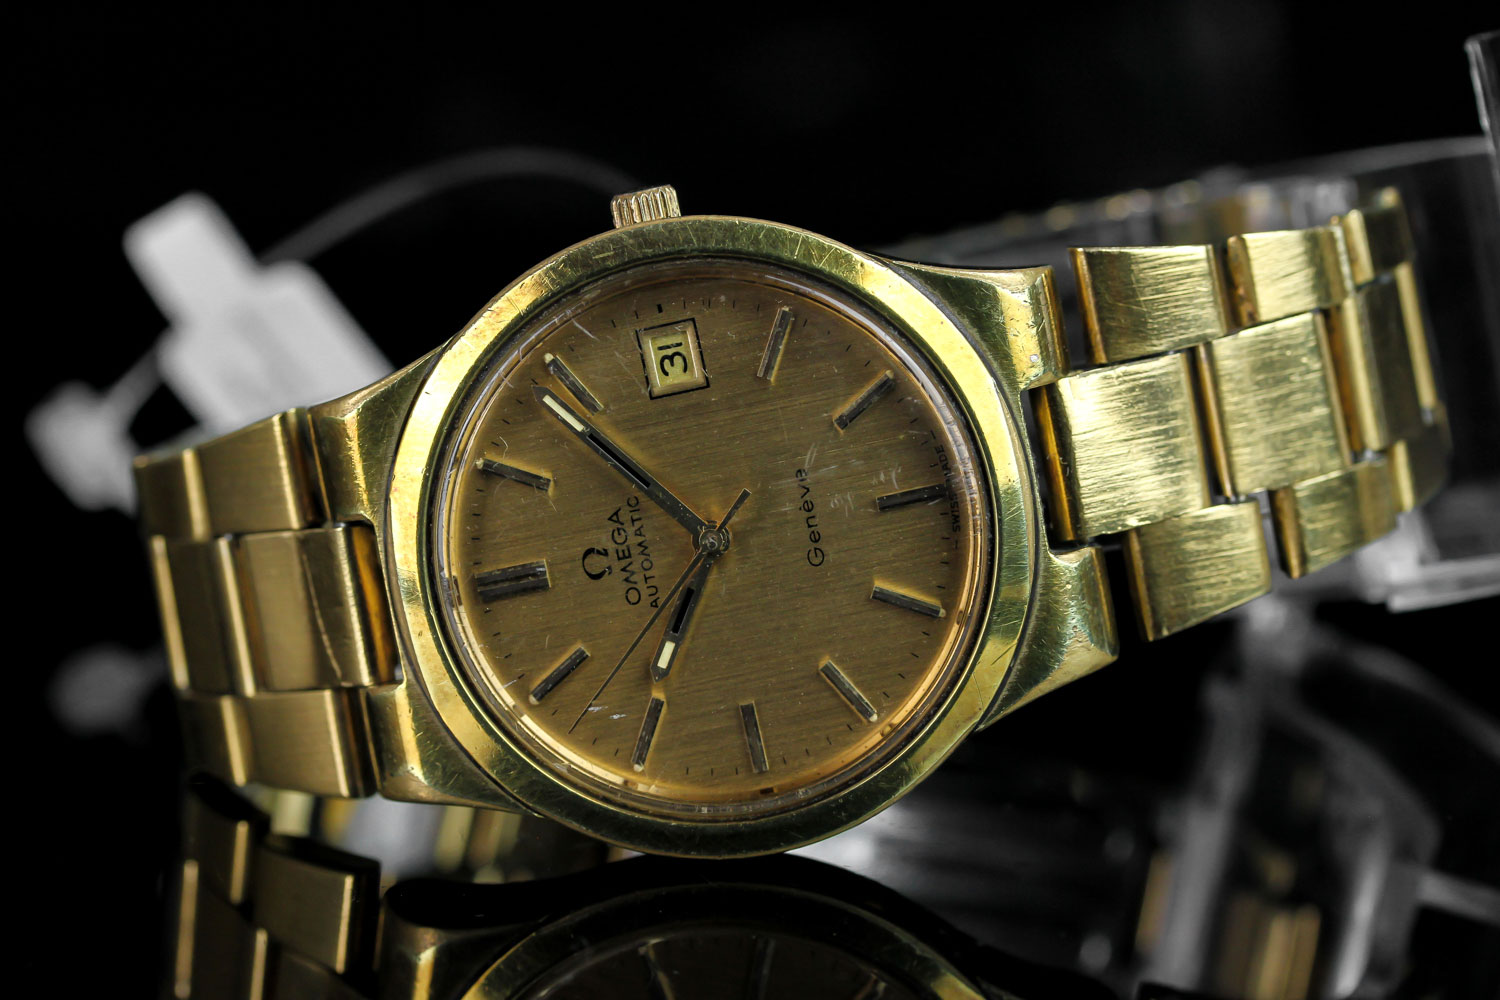 GENTLEMEN'S OMEGA GENEVE AUTOMATIC DATE WRISTWATCH, circular champagne dial with gold and black hour